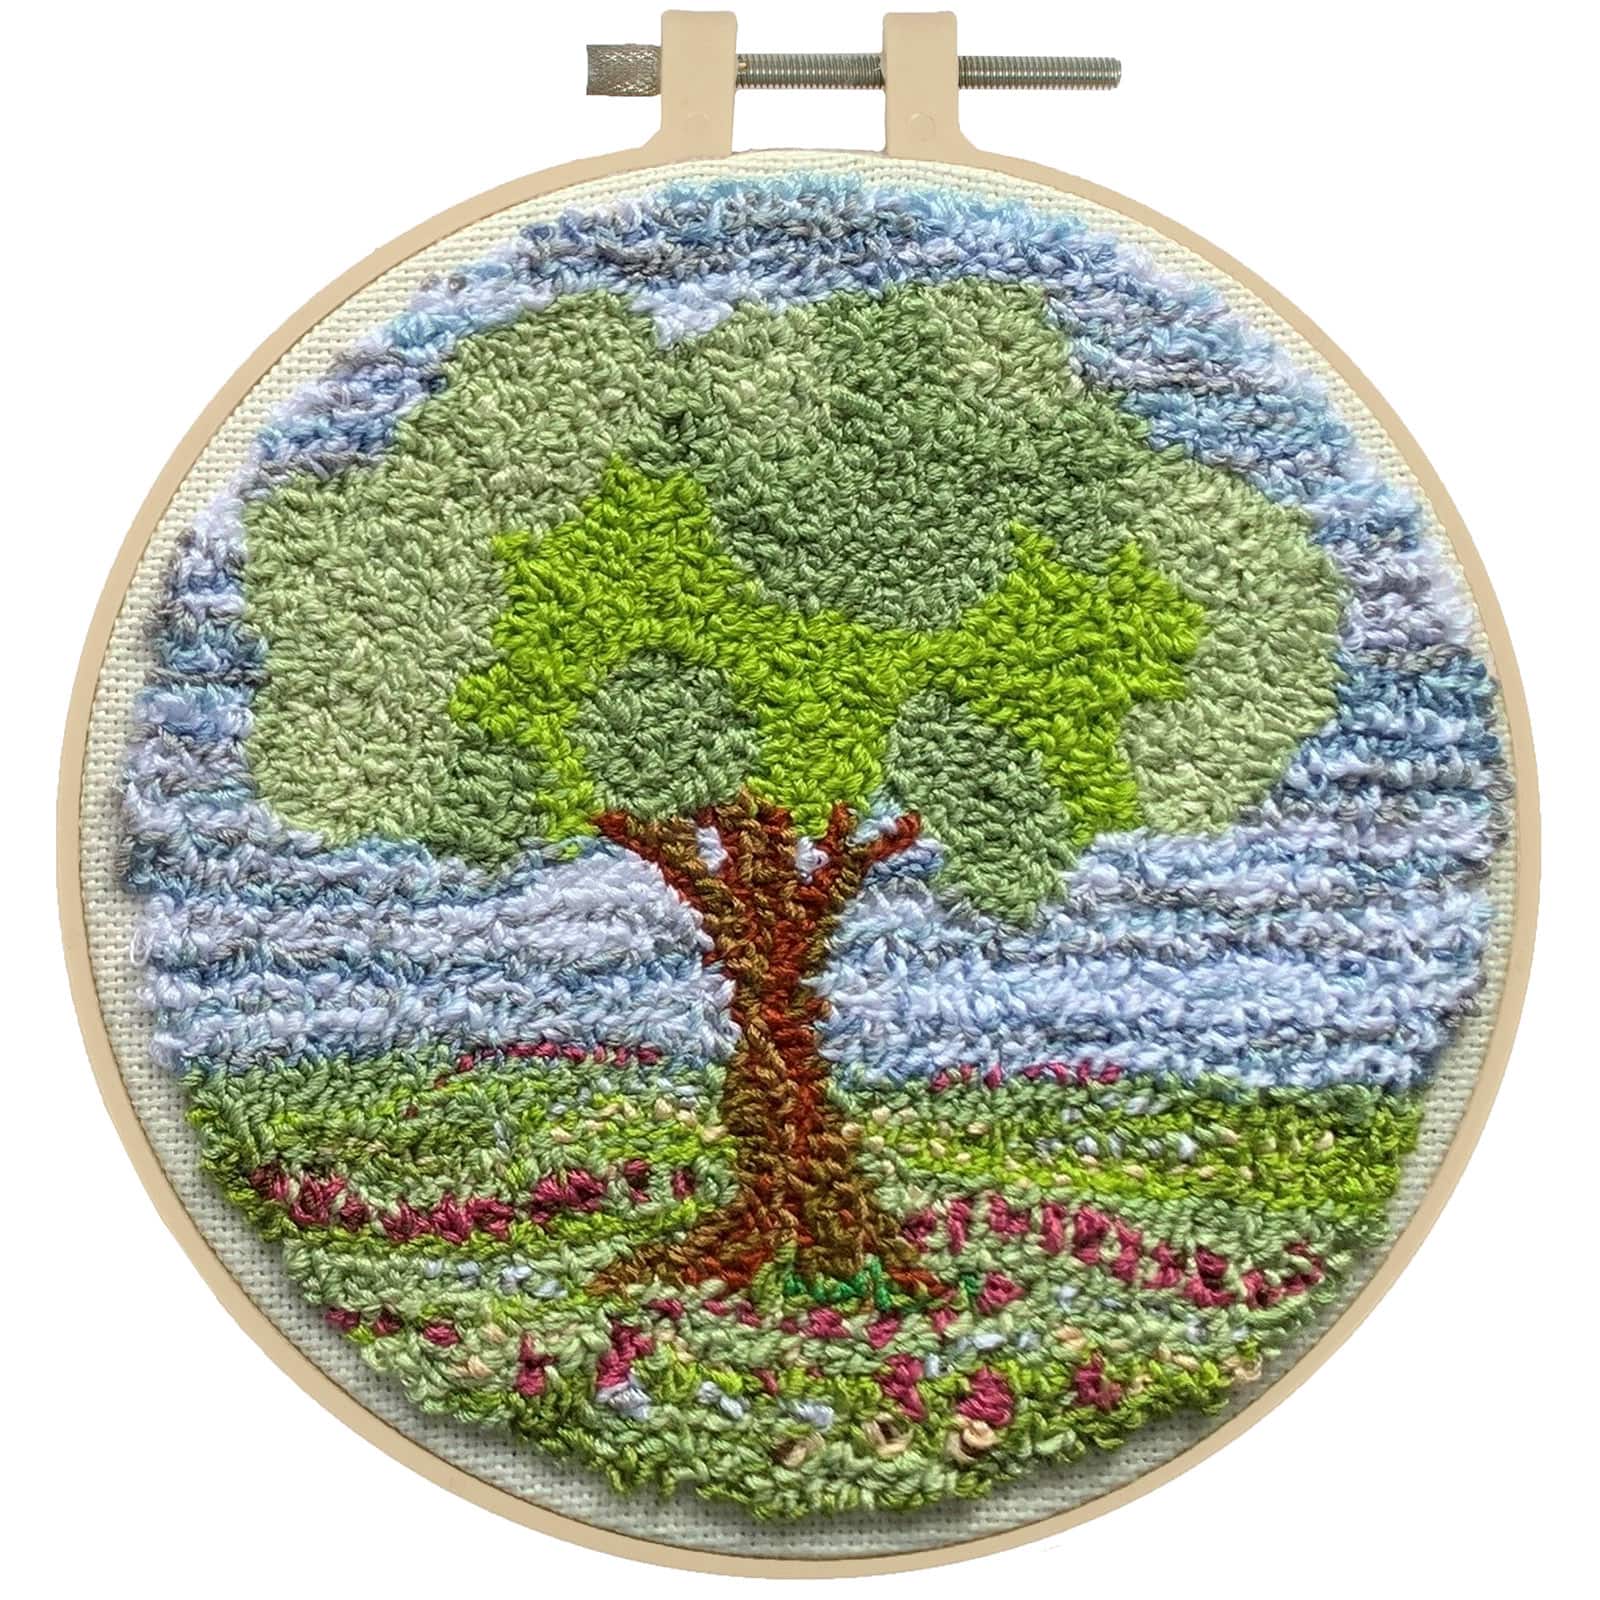 Tree Punch Needle Kit by Loops & Threads®